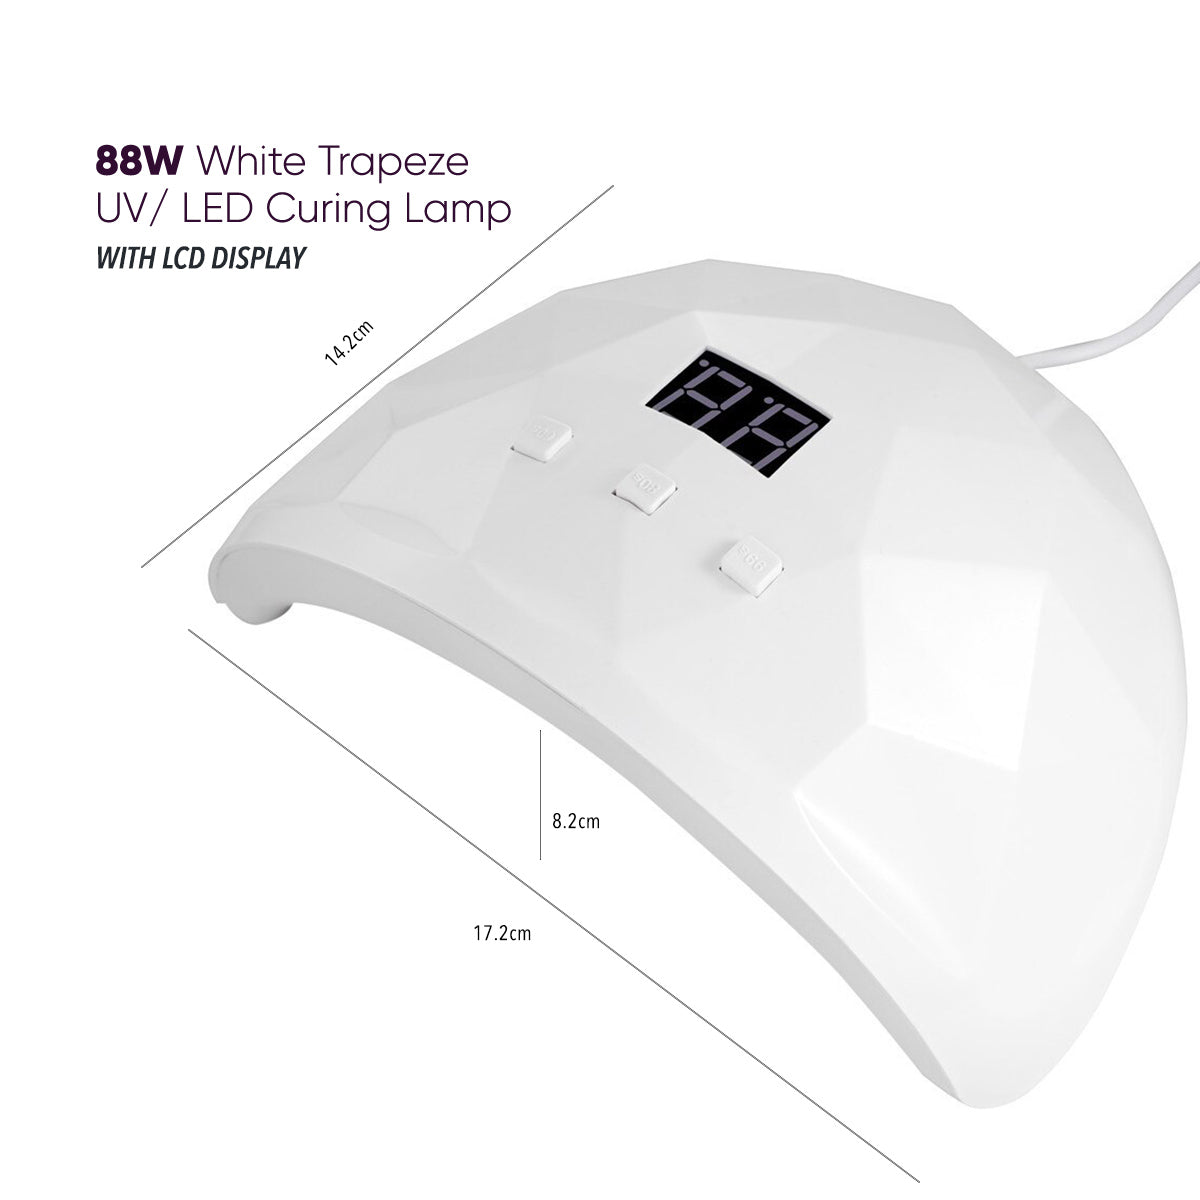 Trapeze UV LED 88W Curing Lamp